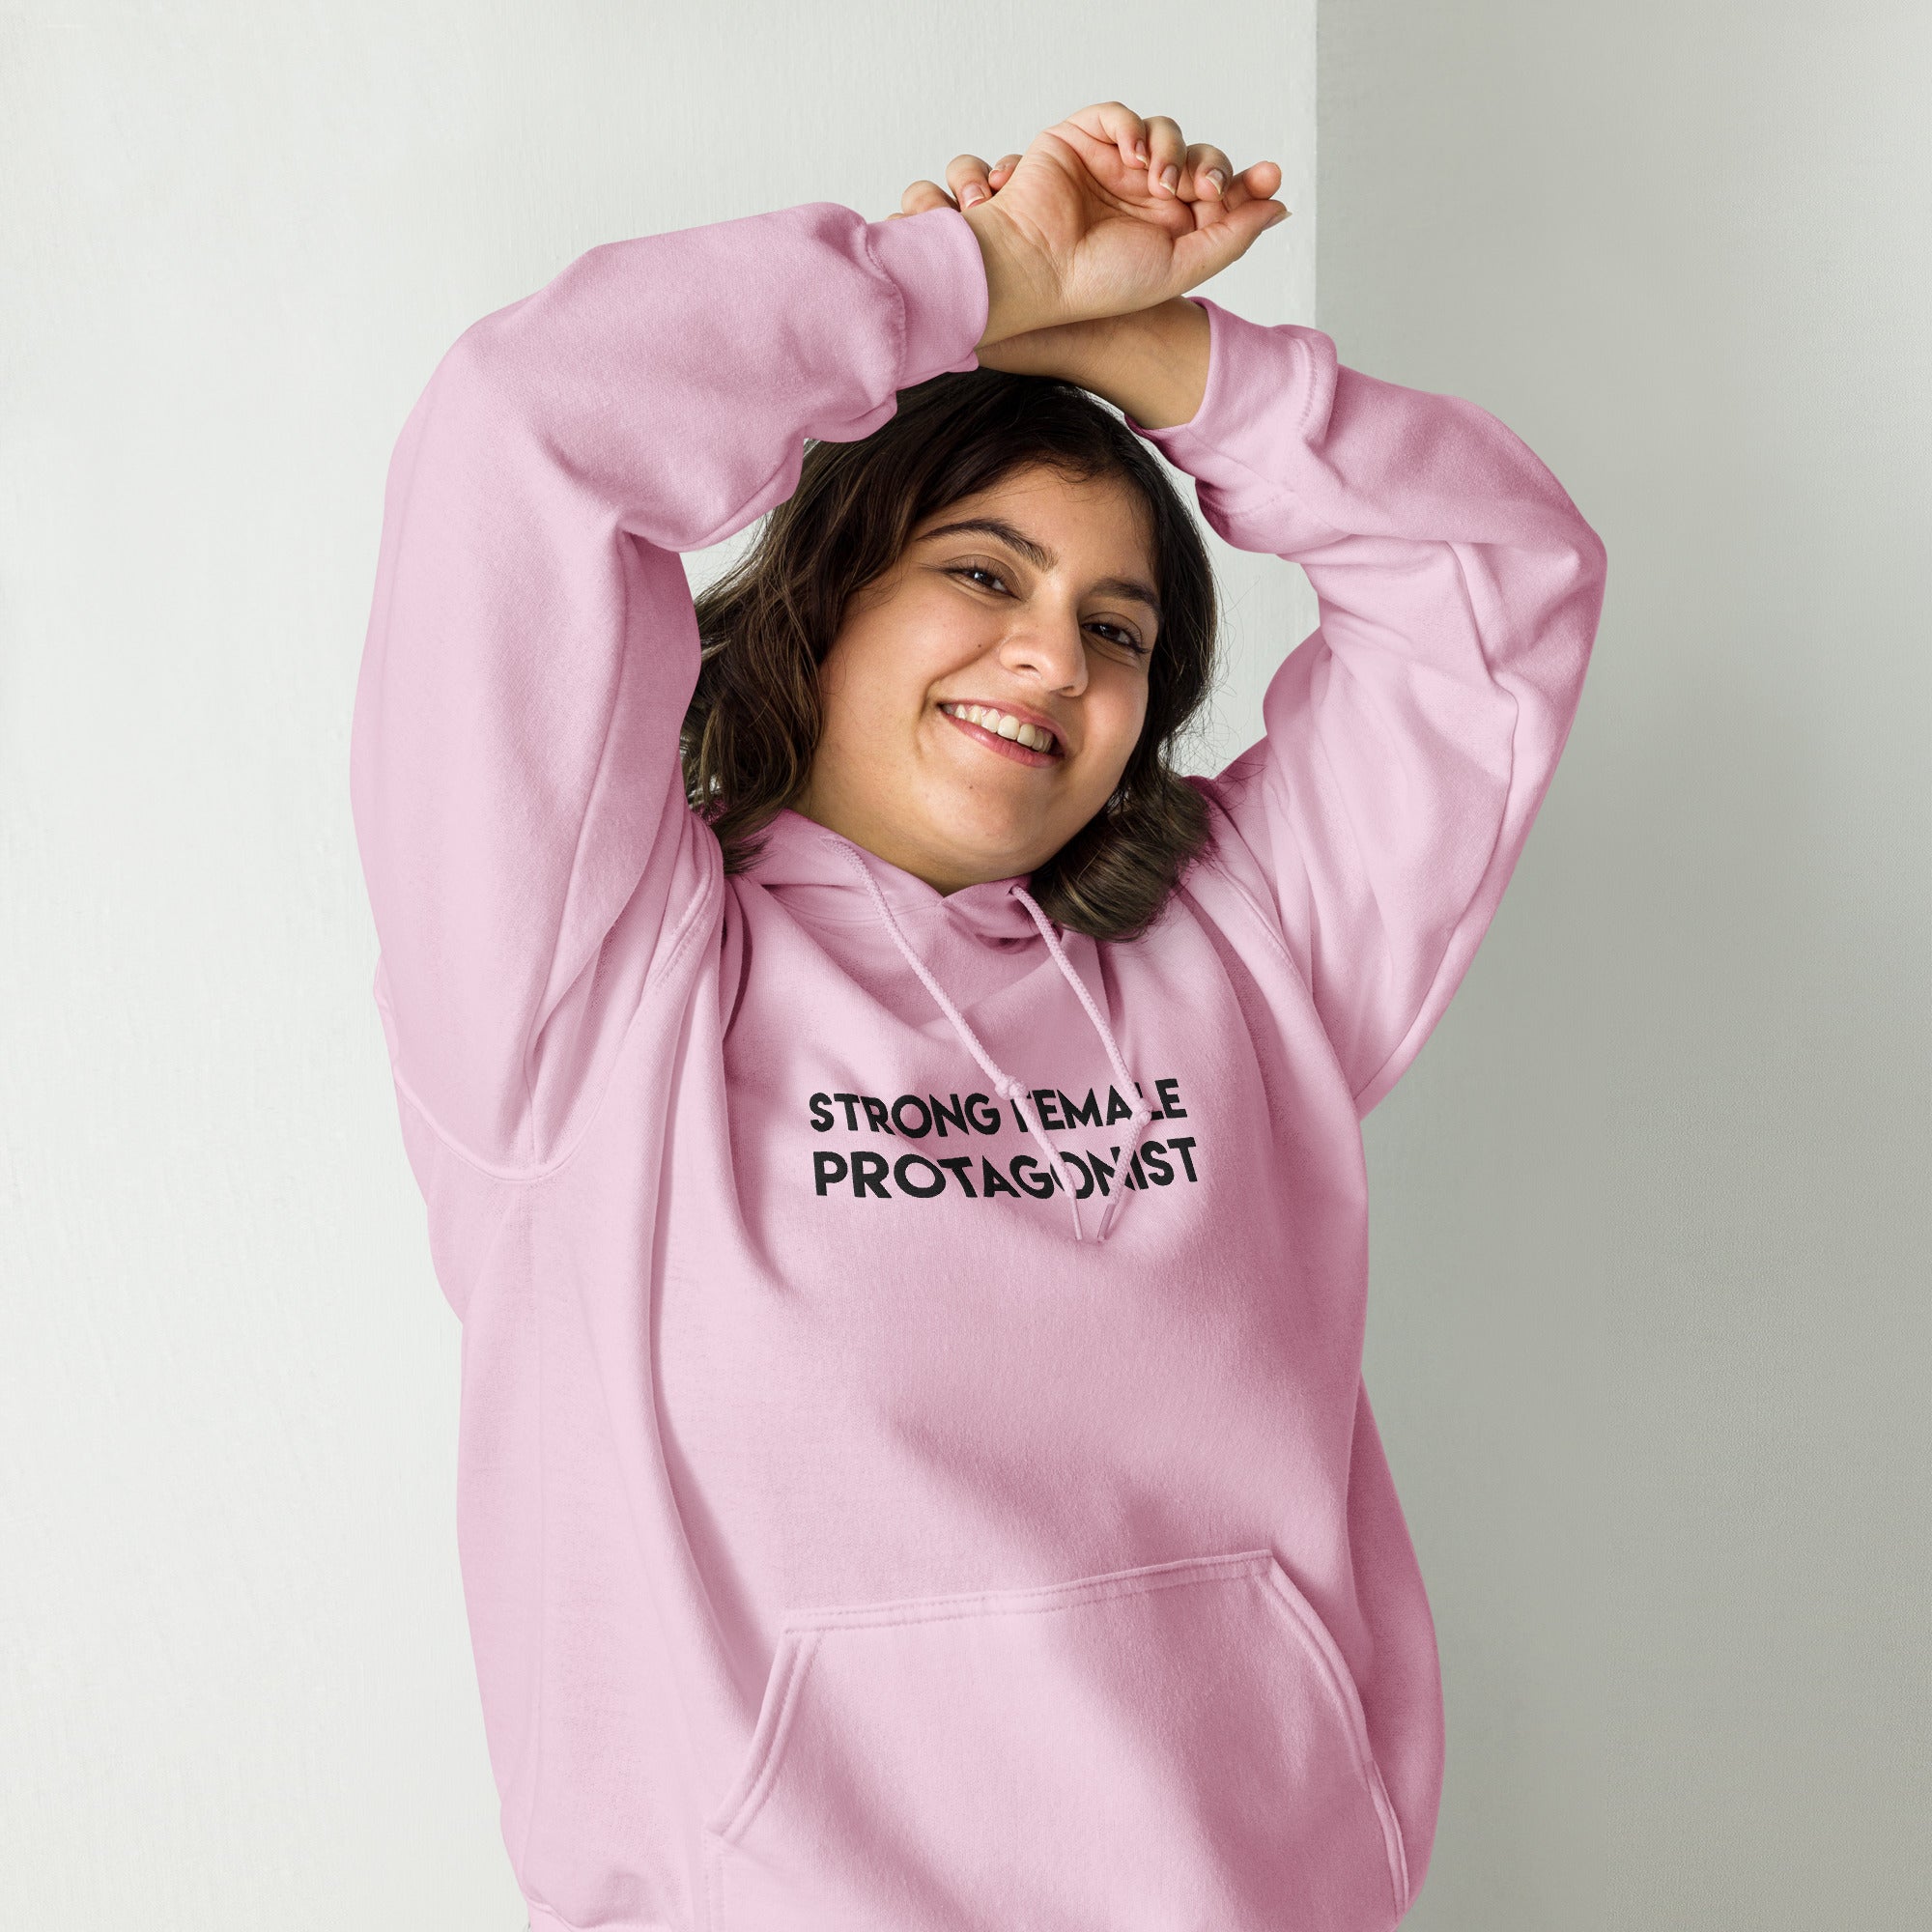 Strong Female Protagonist - Embroidered Staple Unisex Hoodie